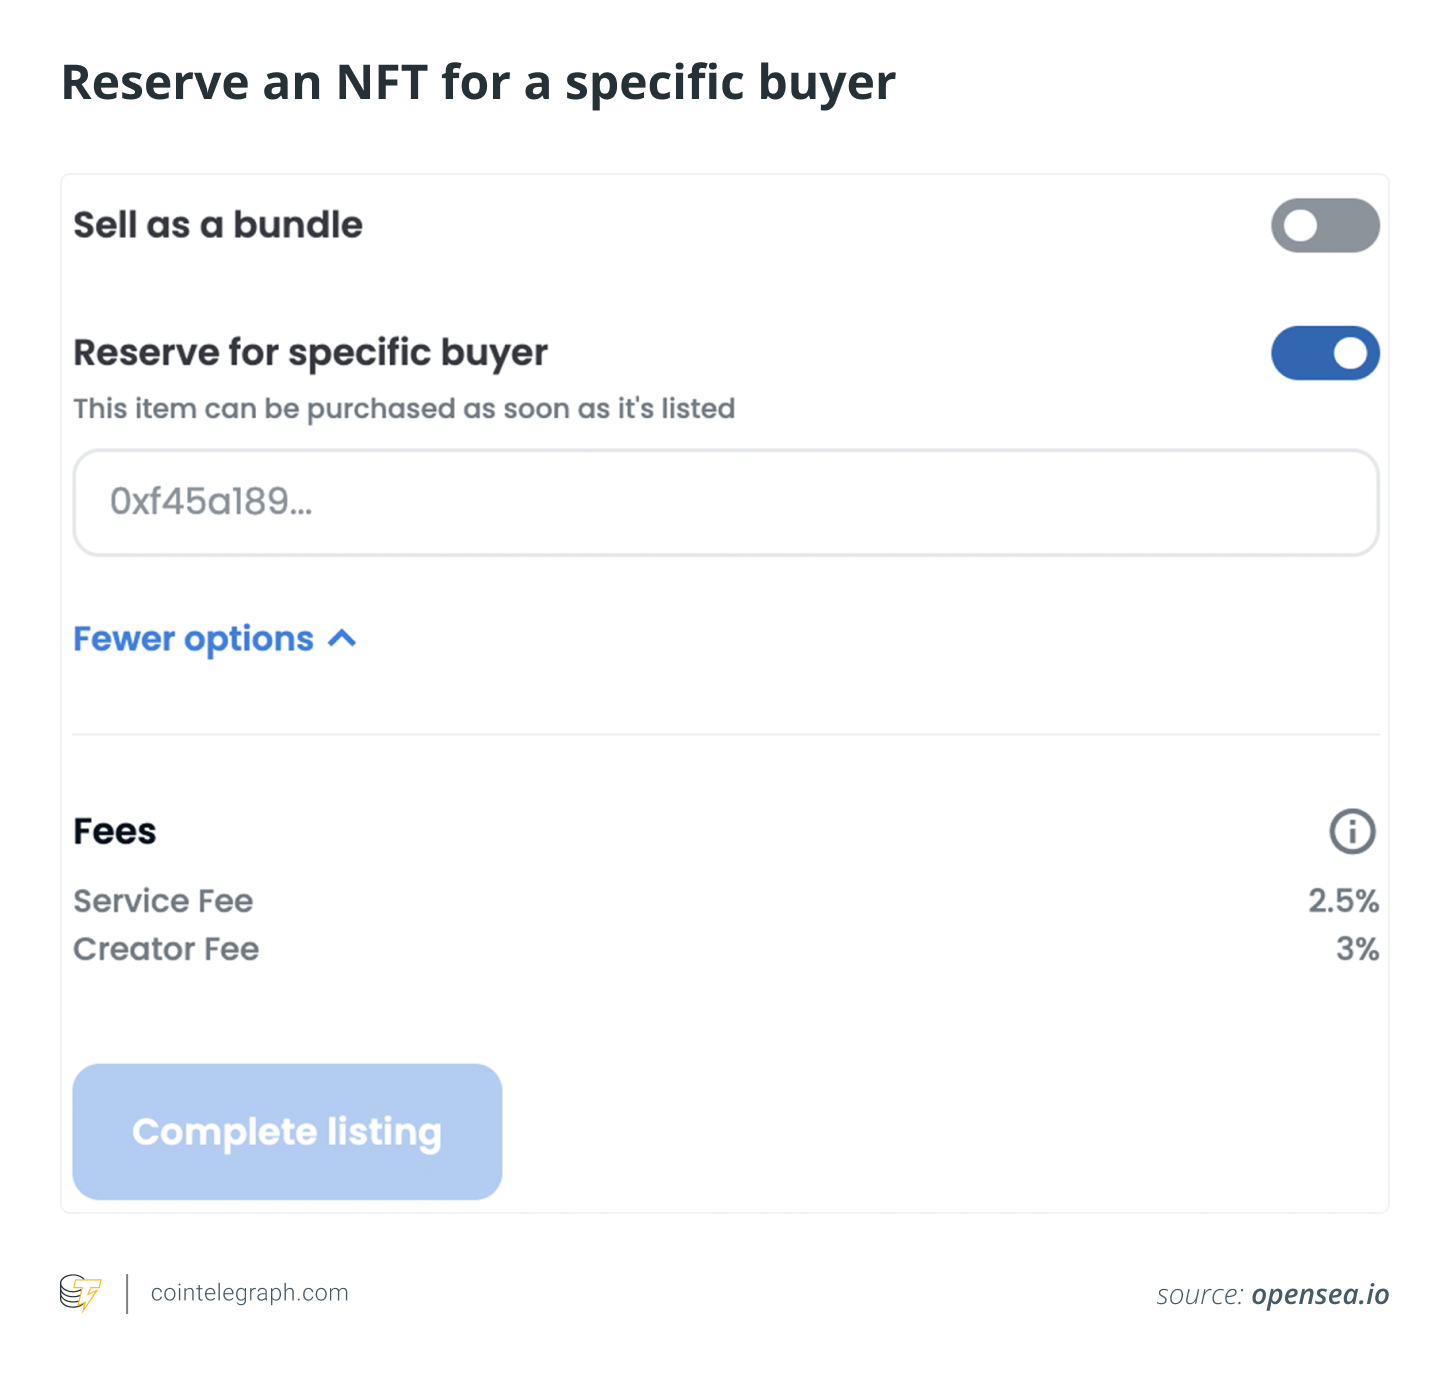 Reserve an NFT for a specific buyer